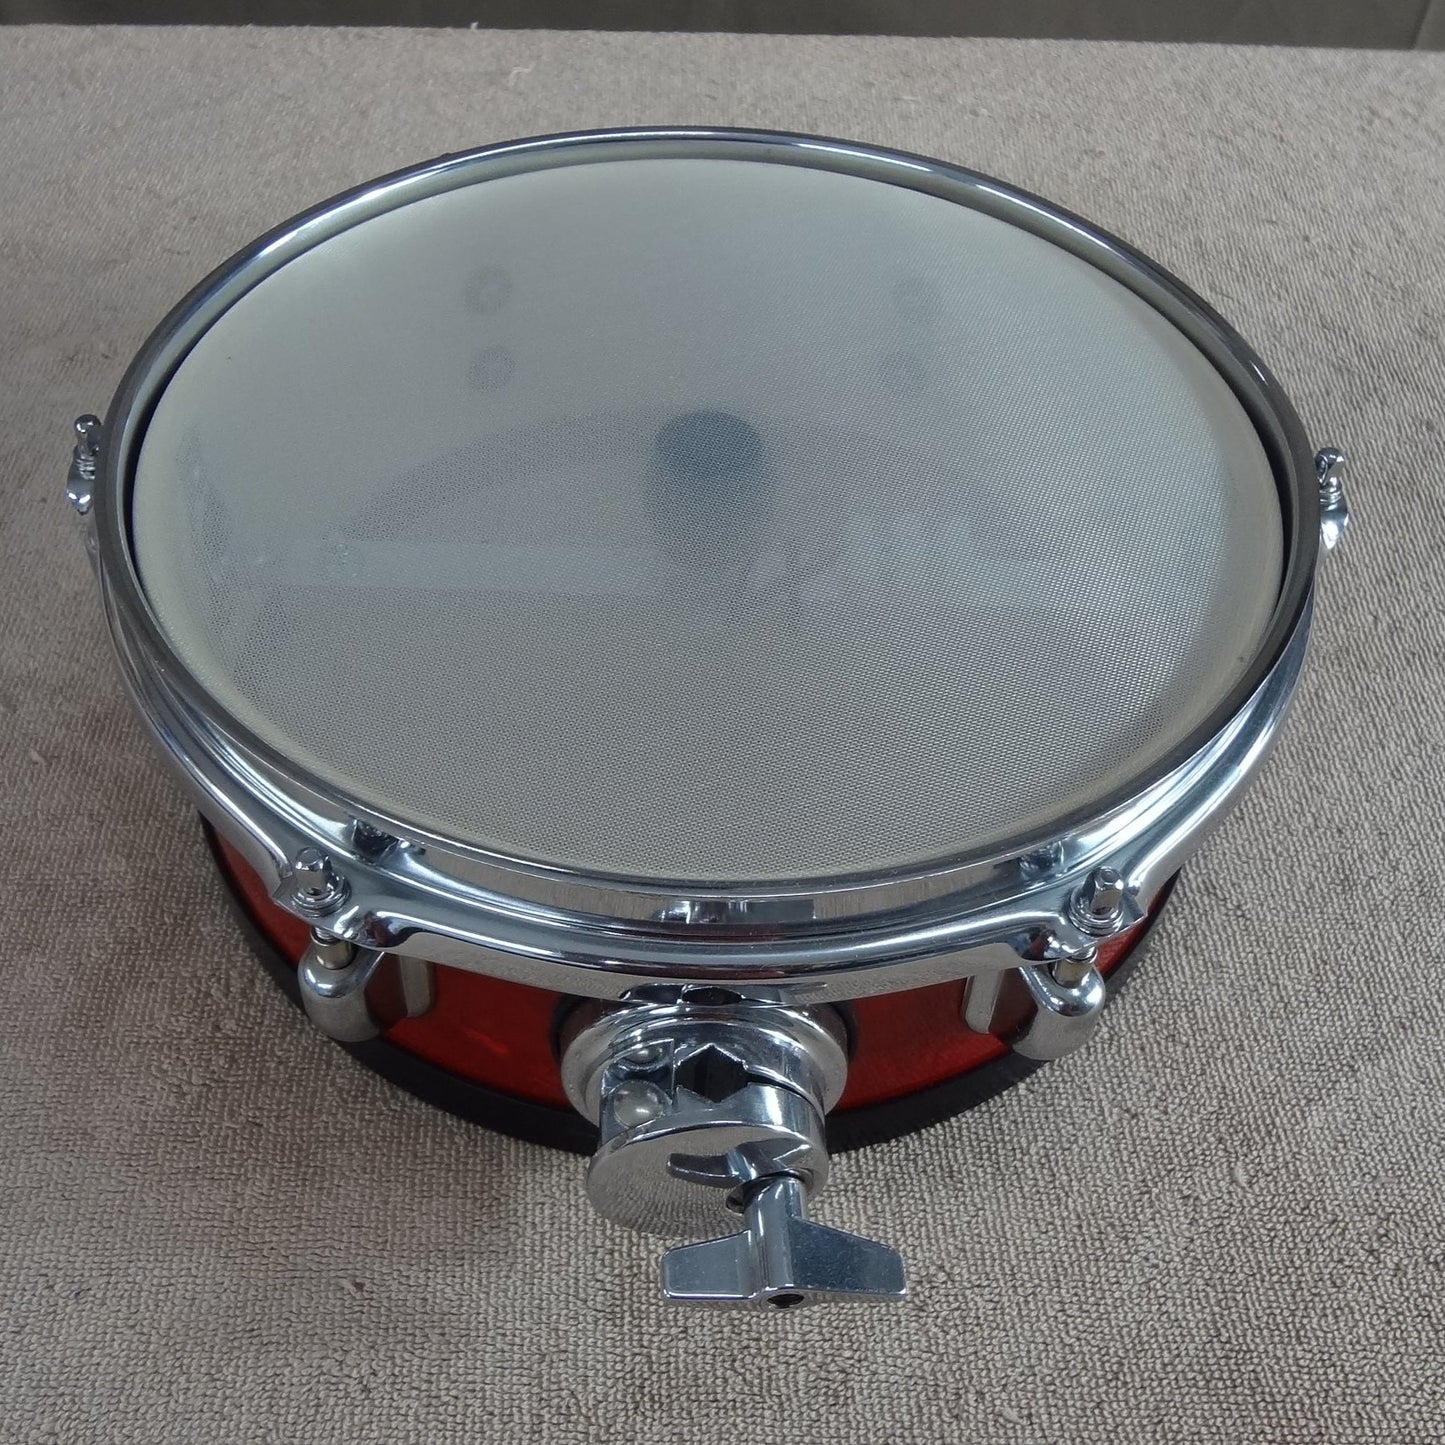 4 PIECE CUSTOM ELECTRONIC DRUM SHELL PACK - RED PEARL